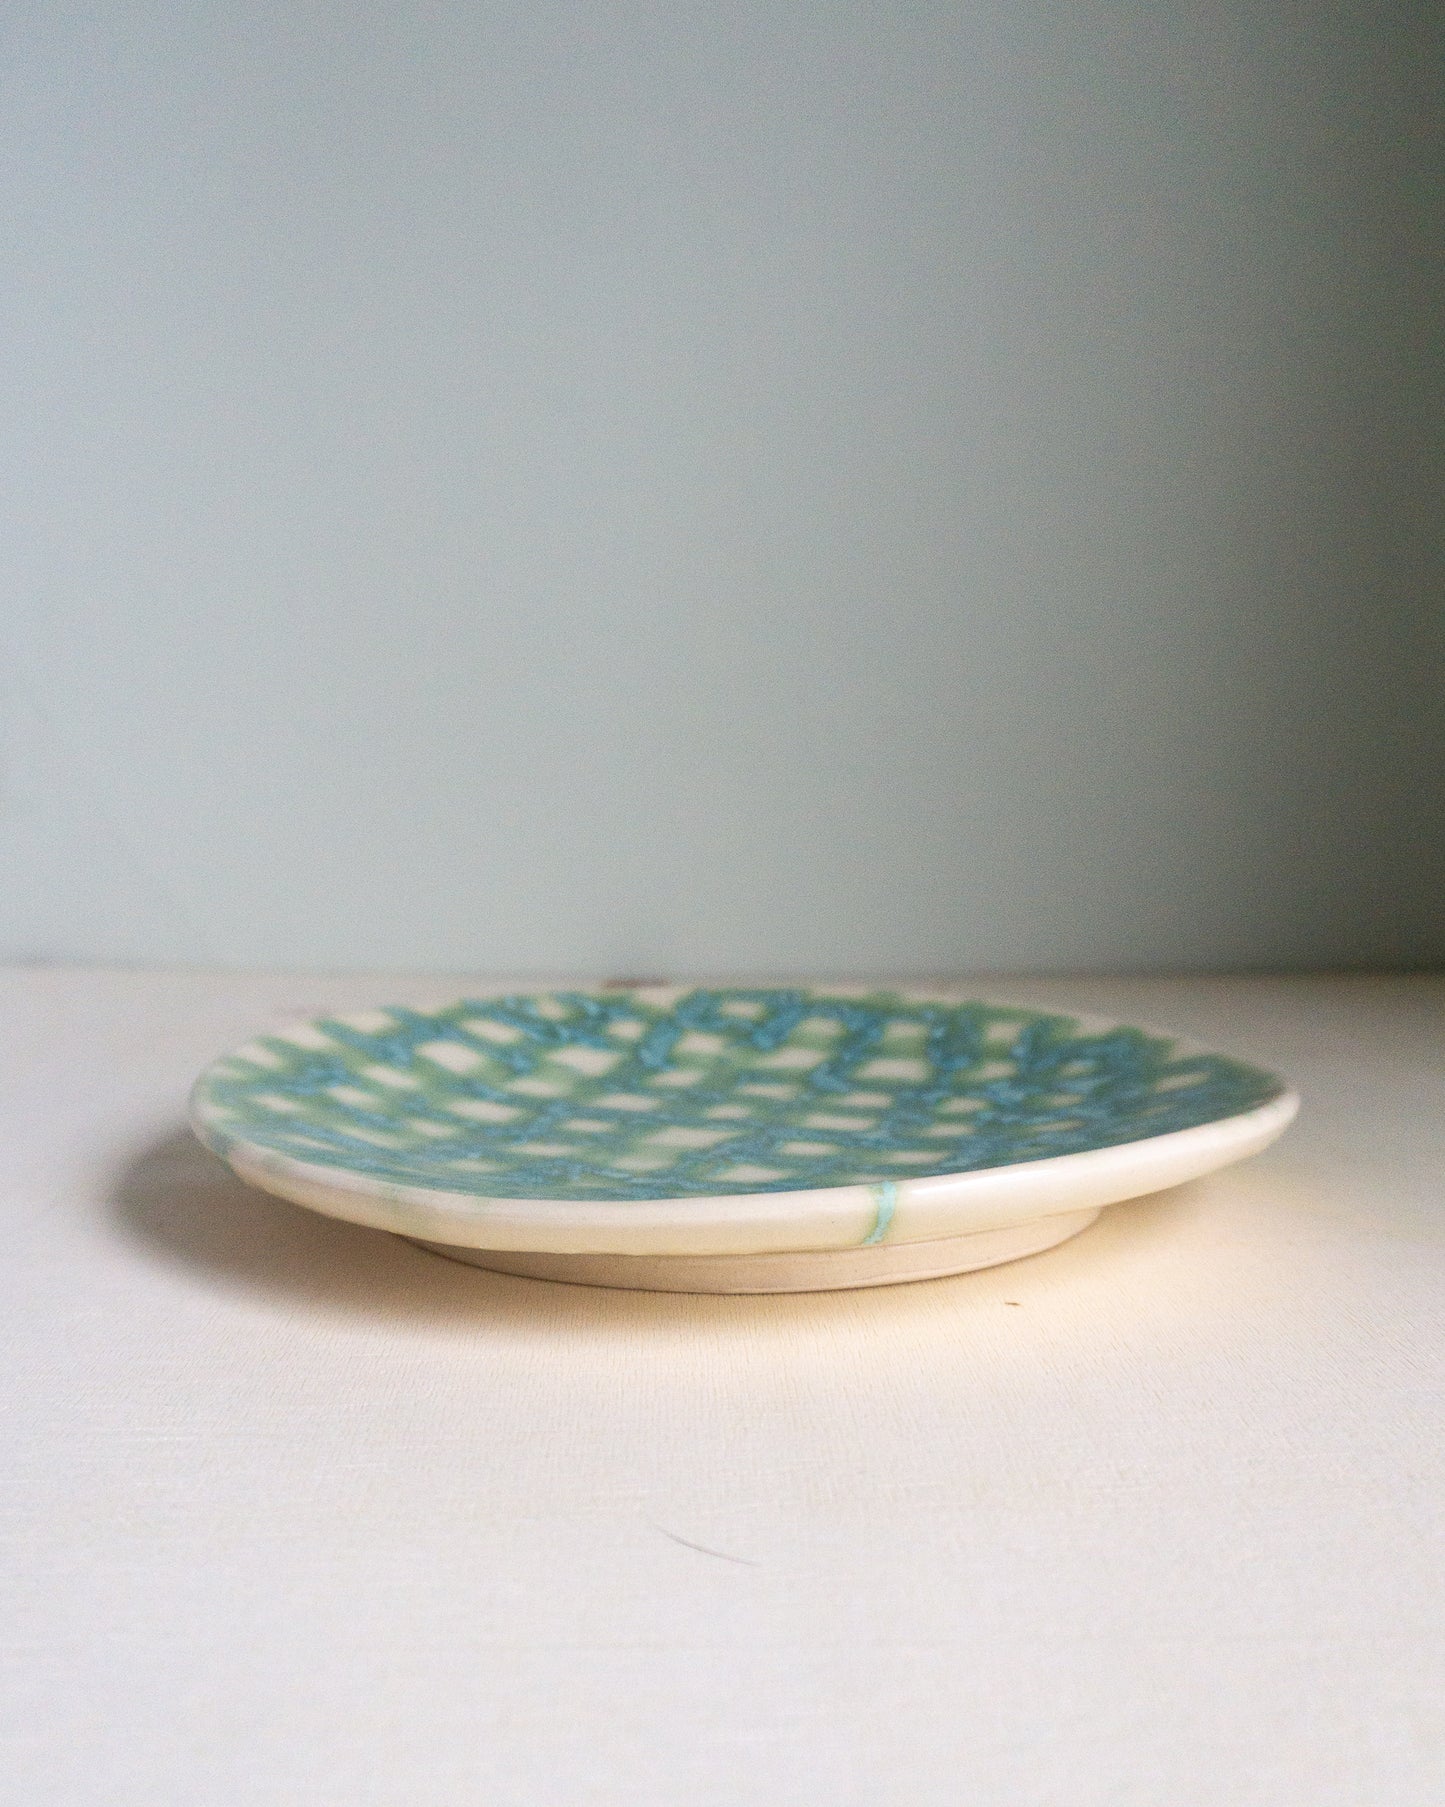 blue-green patterned plate